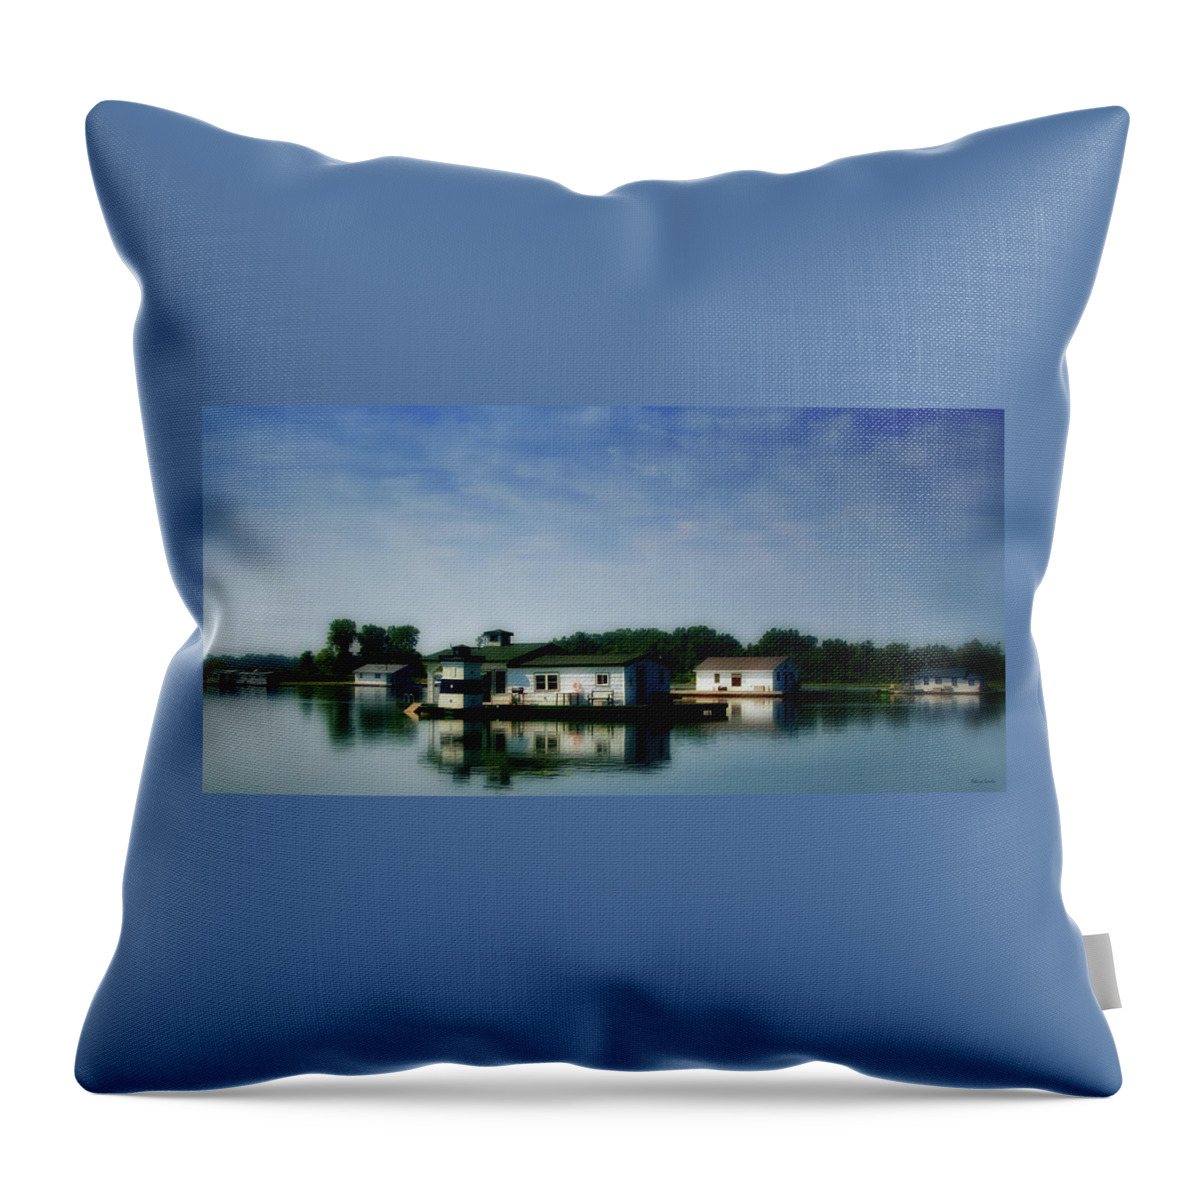 Boats Throw Pillow featuring the photograph Horseshoe Pond by Rebecca Samler